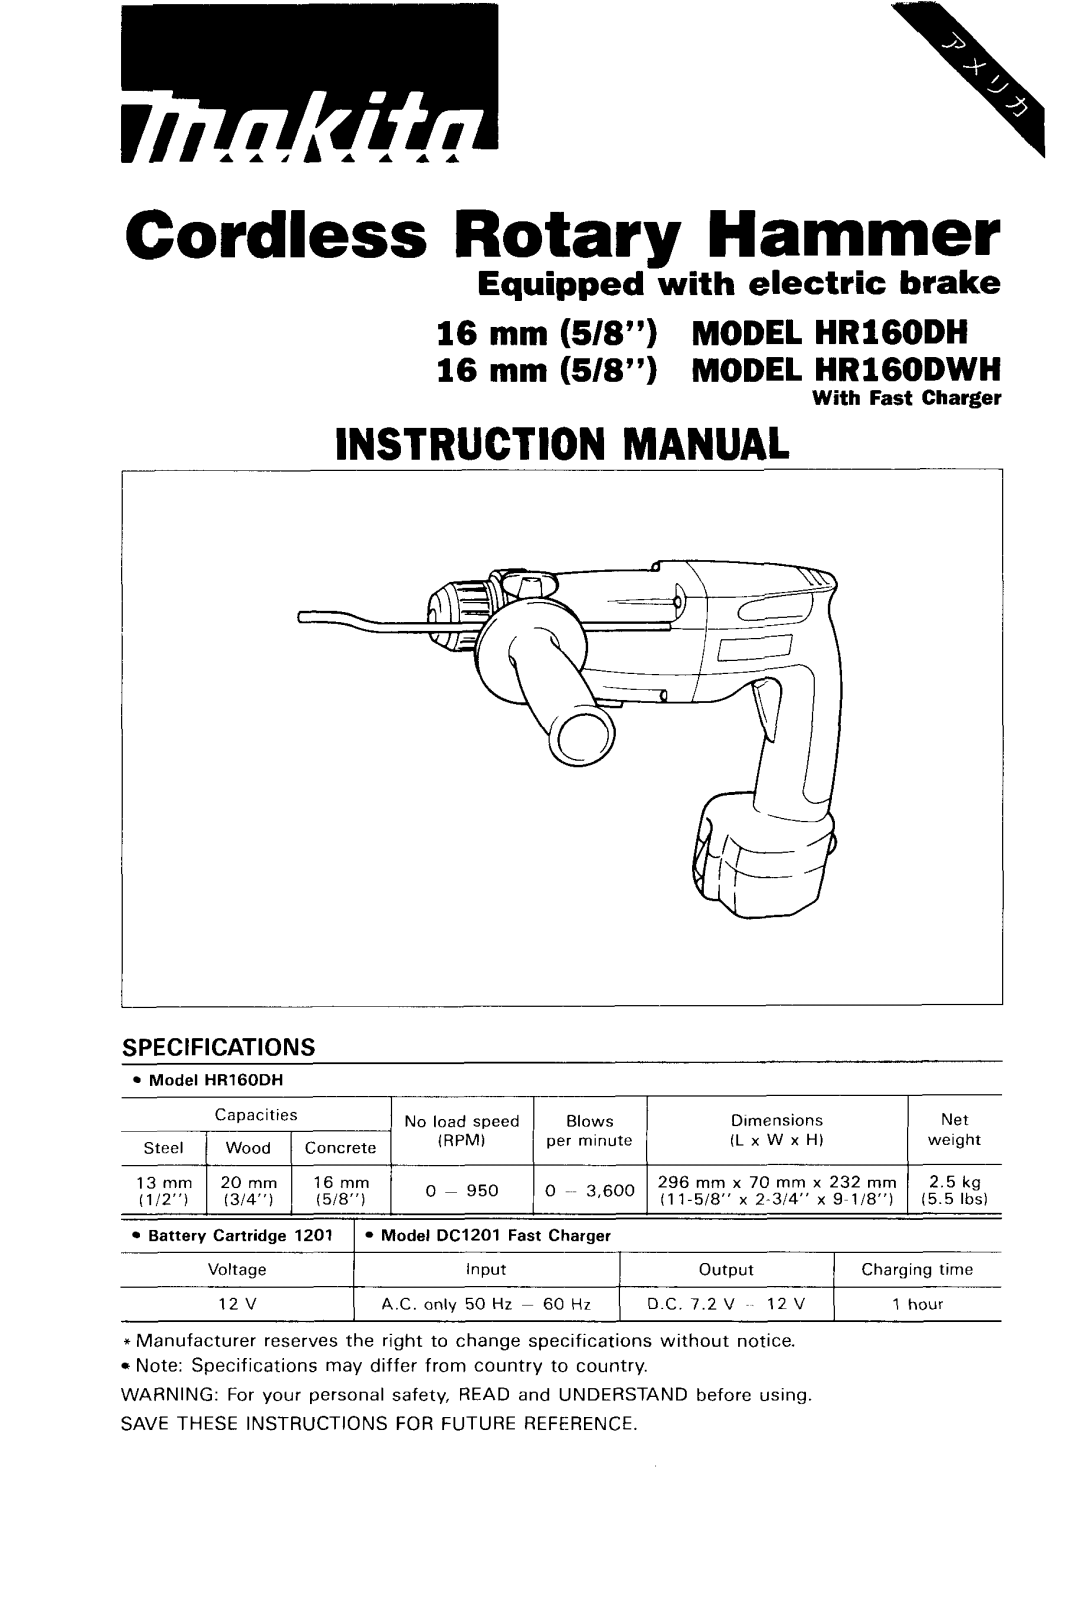 Makita instruction manual Cordless Rotary Hammer, Equipped with electric brake 16 mm 5/8” MODEL HRIGODH, SPECIFICAT10NS 